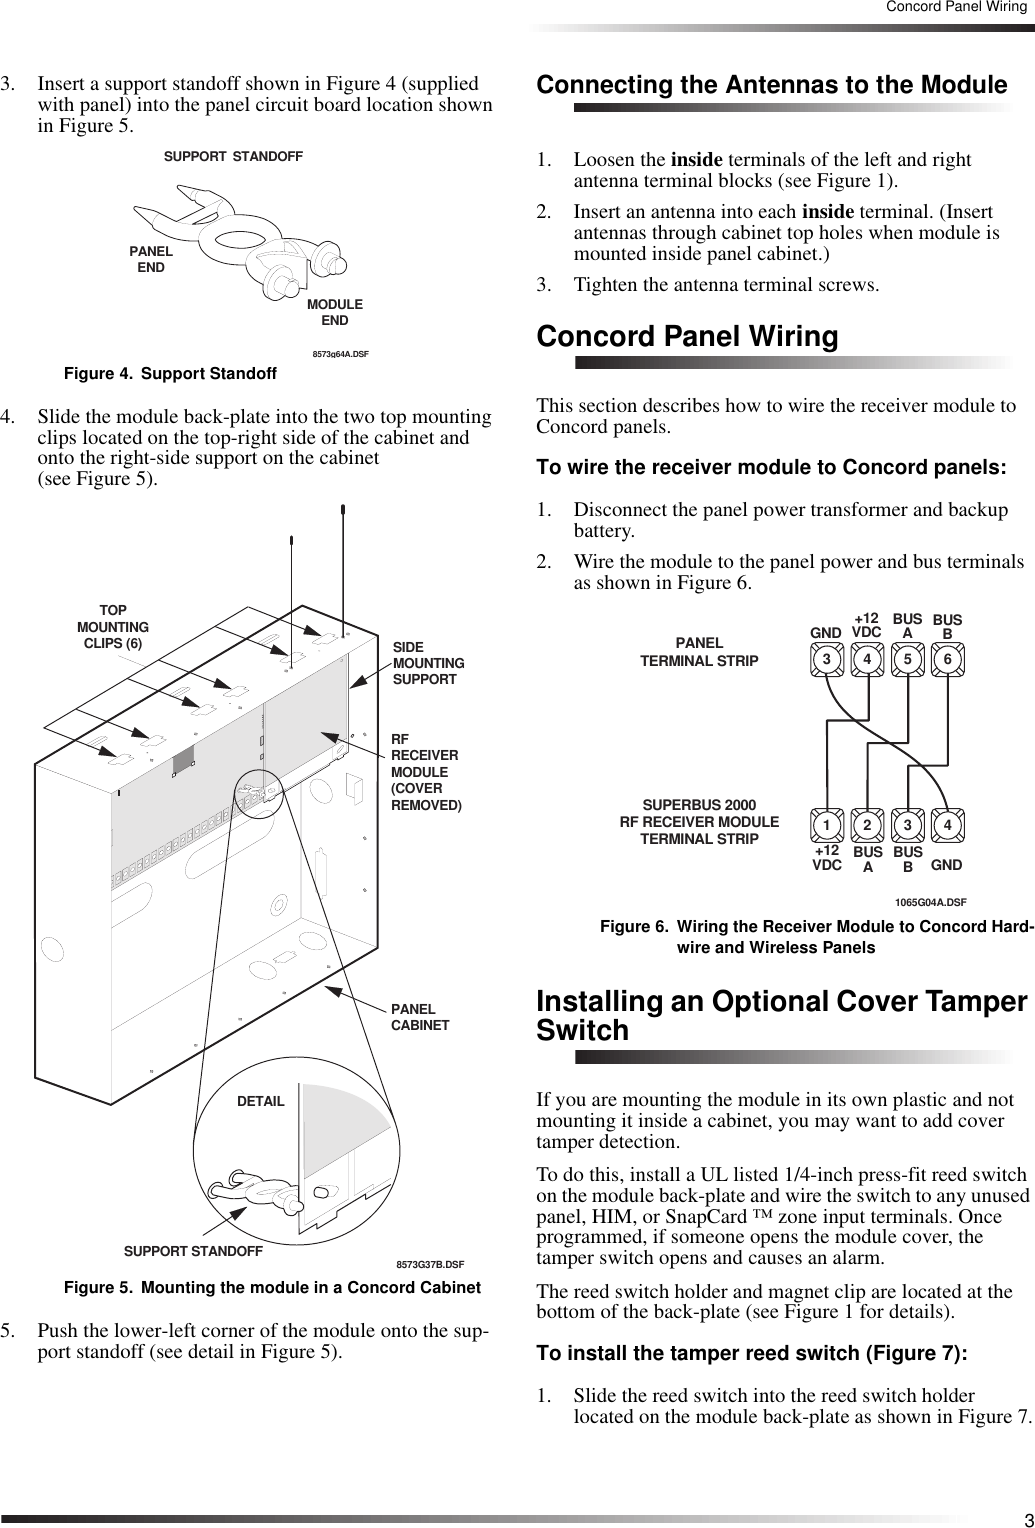 3Concord Panel Wiring3. Insert a support standoff shown in Figure 4 (supplied with panel) into the panel circuit board location shown in Figure 5.Figure 4. Support Standoff4. Slide the module back-plate into the two top mounting clips located on the top-right side of the cabinet and onto the right-side support on the cabinet (see Figure 5).Figure 5. Mounting the module in a Concord Cabinet5. Push the lower-left corner of the module onto the sup-port standoff (see detail in Figure 5).Connecting the Antennas to the Module1. Loosen the inside terminals of the left and right antenna terminal blocks (see Figure 1).2. Insert an antenna into each inside terminal. (Insert antennas through cabinet top holes when module is mounted inside panel cabinet.)3. Tighten the antenna terminal screws.Concord Panel WiringThis section describes how to wire the receiver module to Concord panels.To wire the receiver module to Concord panels:1. Disconnect the panel power transformer and backup battery.2. Wire the module to the panel power and bus terminals as shown in Figure 6.Figure 6. Wiring the Receiver Module to Concord Hard-wire and Wireless PanelsInstalling an Optional Cover Tamper SwitchIf you are mounting the module in its own plastic and not mounting it inside a cabinet, you may want to add cover tamper detection.To do this, install a UL listed 1/4-inch press-fit reed switch on the module back-plate and wire the switch to any unused panel, HIM, or SnapCard ™ zone input terminals. Once programmed, if someone opens the module cover, the tamper switch opens and causes an alarm.The reed switch holder and magnet clip are located at the bottom of the back-plate (see Figure 1 for details).To install the tamper reed switch (Figure 7):1. Slide the reed switch into the reed switch holder located on the module back-plate as shown in Figure 7.SUPPORT STANDOFF8573g64A.DSFPANEL ENDMODULEEND8573G37B.DSFTOP MOUNTINGCLIPS (6)DETAILSUPPORT STANDOFFPANEL CABINETSIDE MOUNTINGSUPPORTRF RECEIVERMODULE(COVERREMOVED)63 4 51065G04A.DSFPANEL TERMINAL STRIP+12VDC BUSABUSBGNDSUPERBUS 2000RF RECEIVER MODULETERMINAL STRIP 41 2 3+12VDC BUSABUSBGND